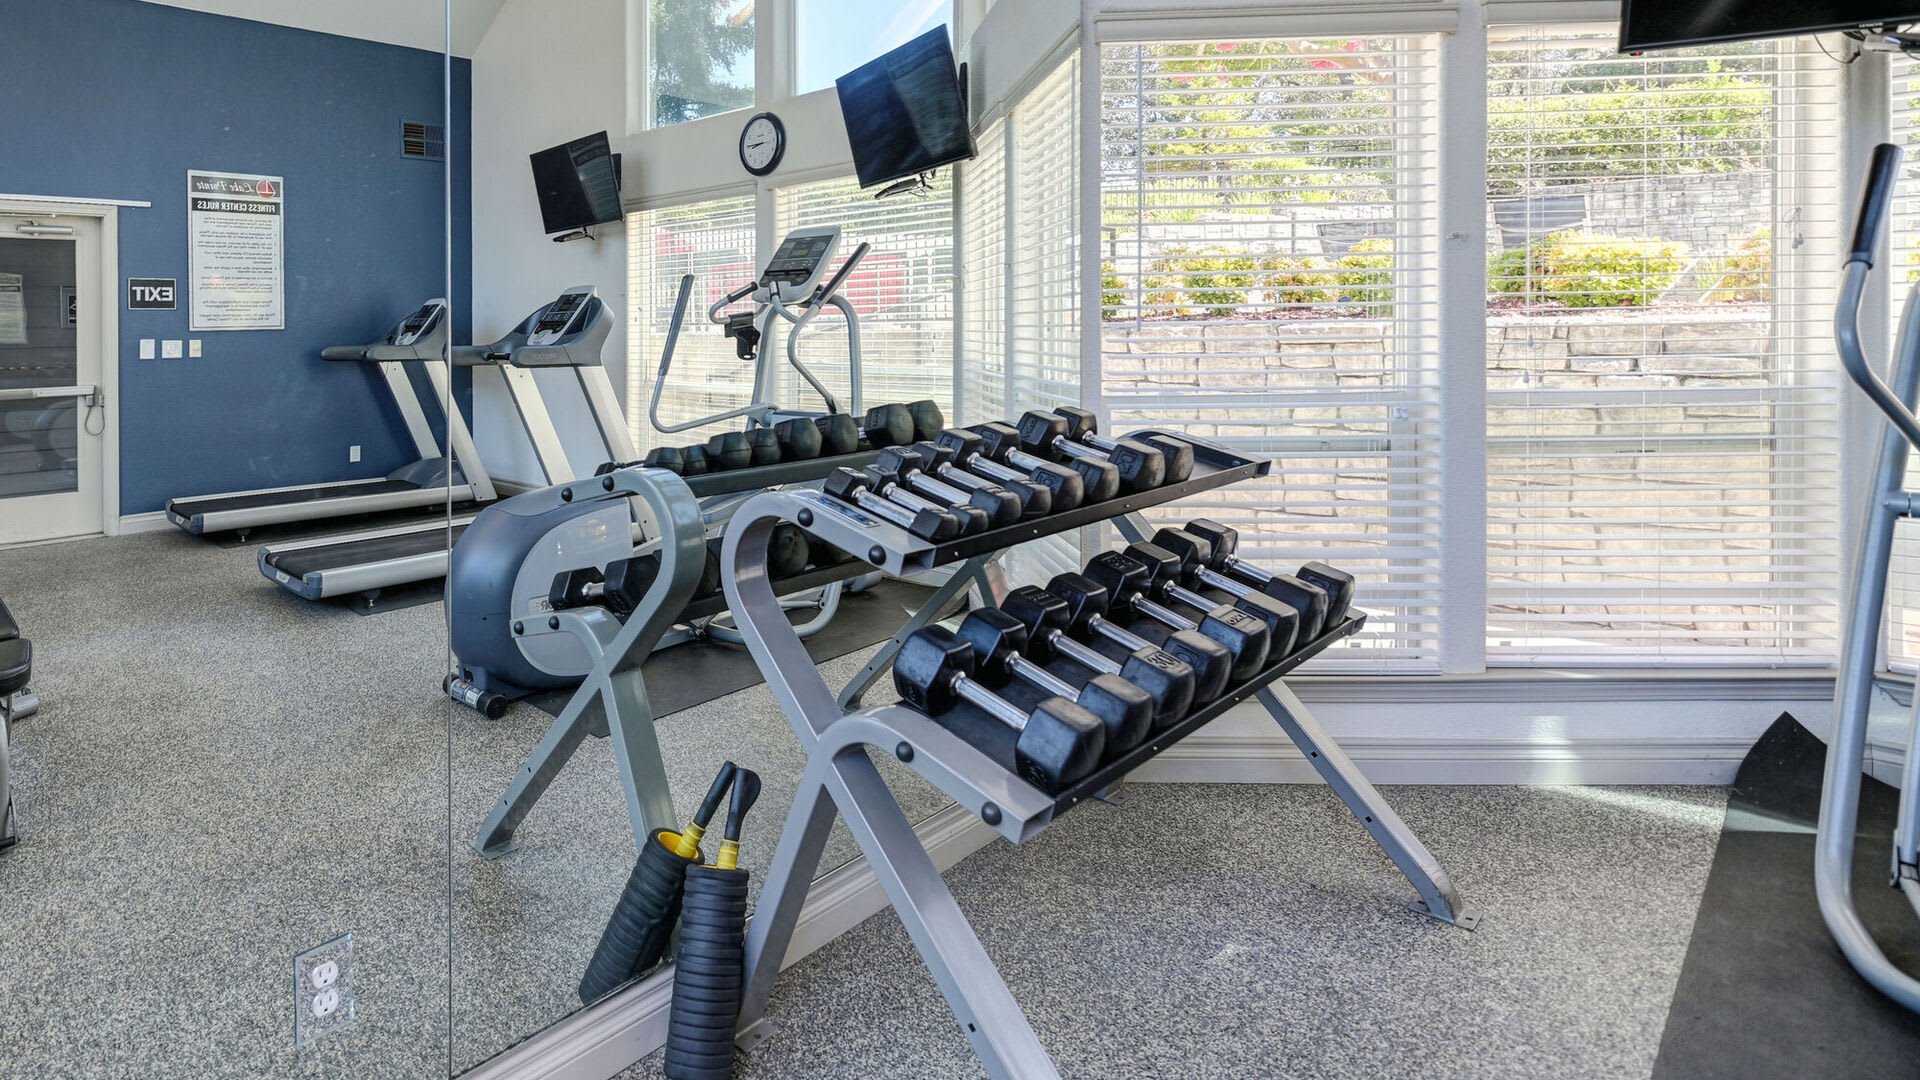 Free weights at Lake Pointe Apartments in Folsom, California